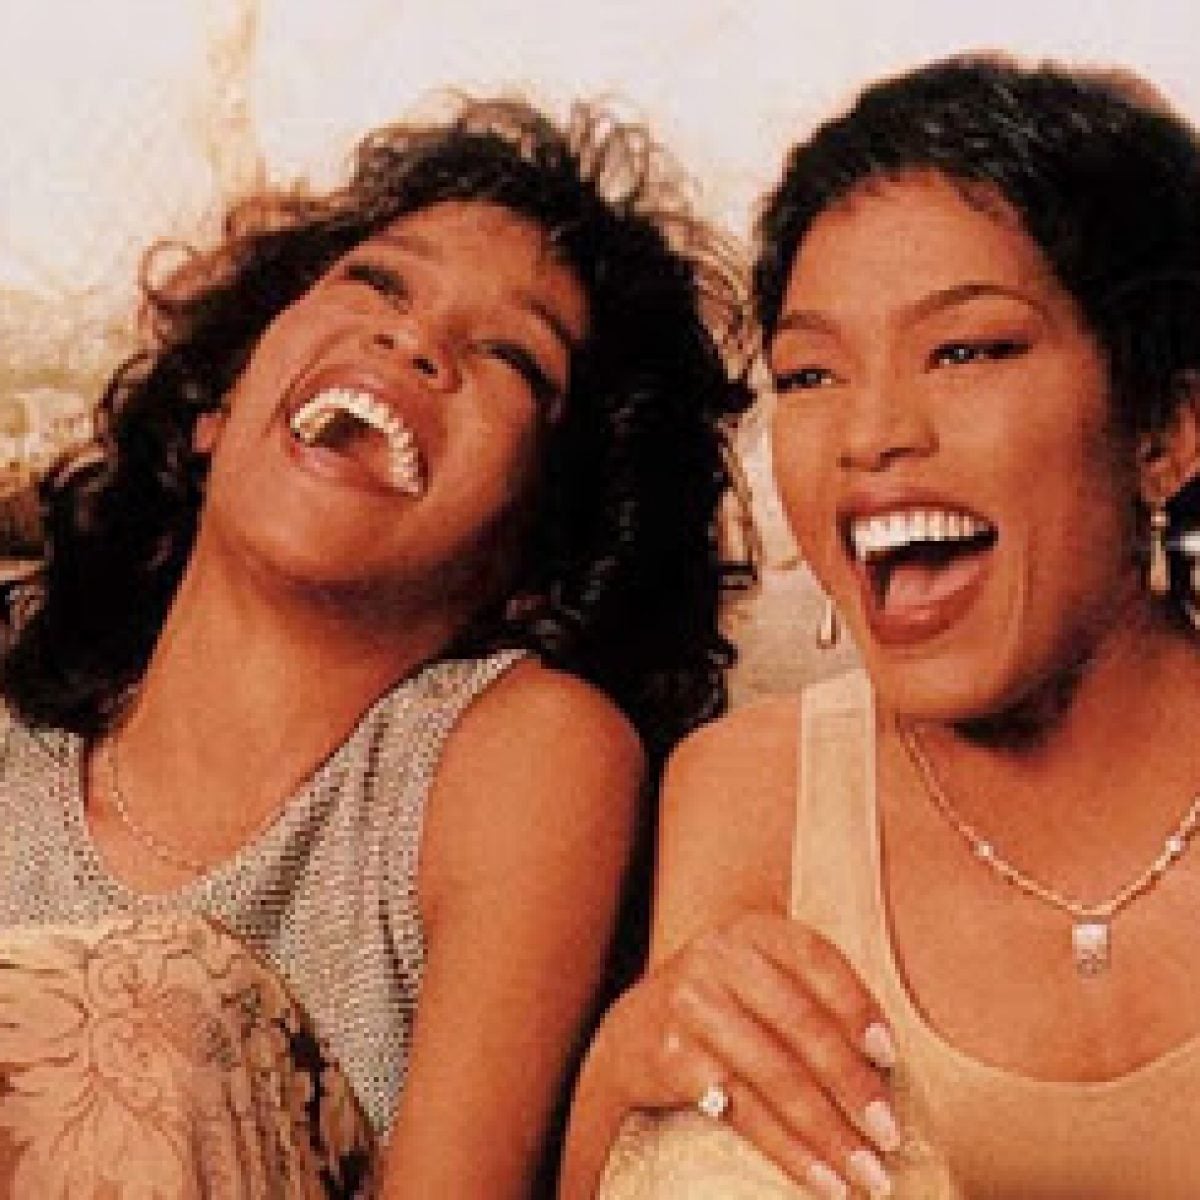 'Waiting To Exhale' Is Going To Become A TV Series